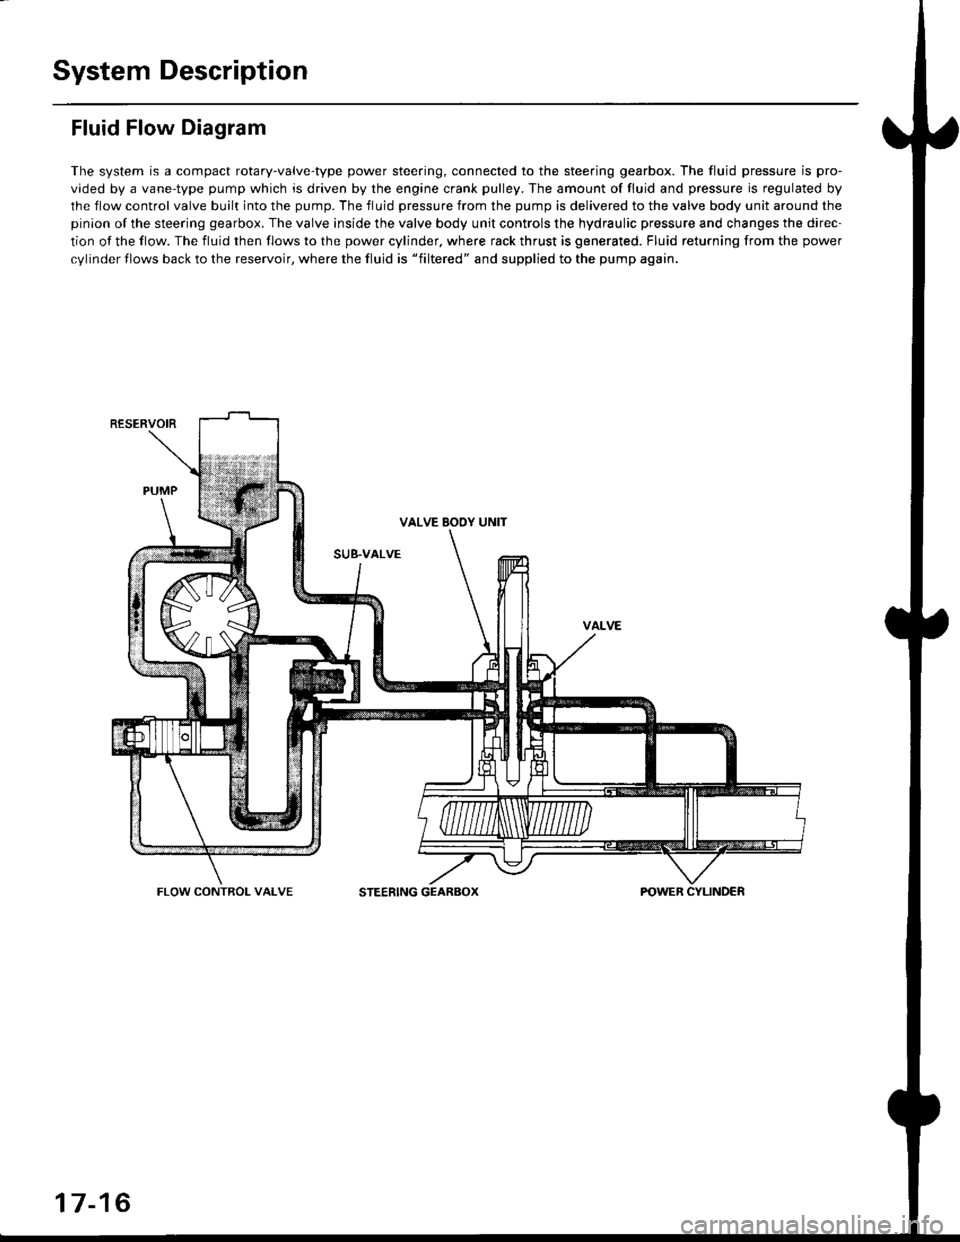 HONDA CIVIC 1998 6.G Workshop Manual System Description
Fluid Flow Diagram
The system is a compact rotary-valve-type power steering, connected to the steering gearbox. The fluid pressure is pro-
vided by a vane-type pump which is driven 